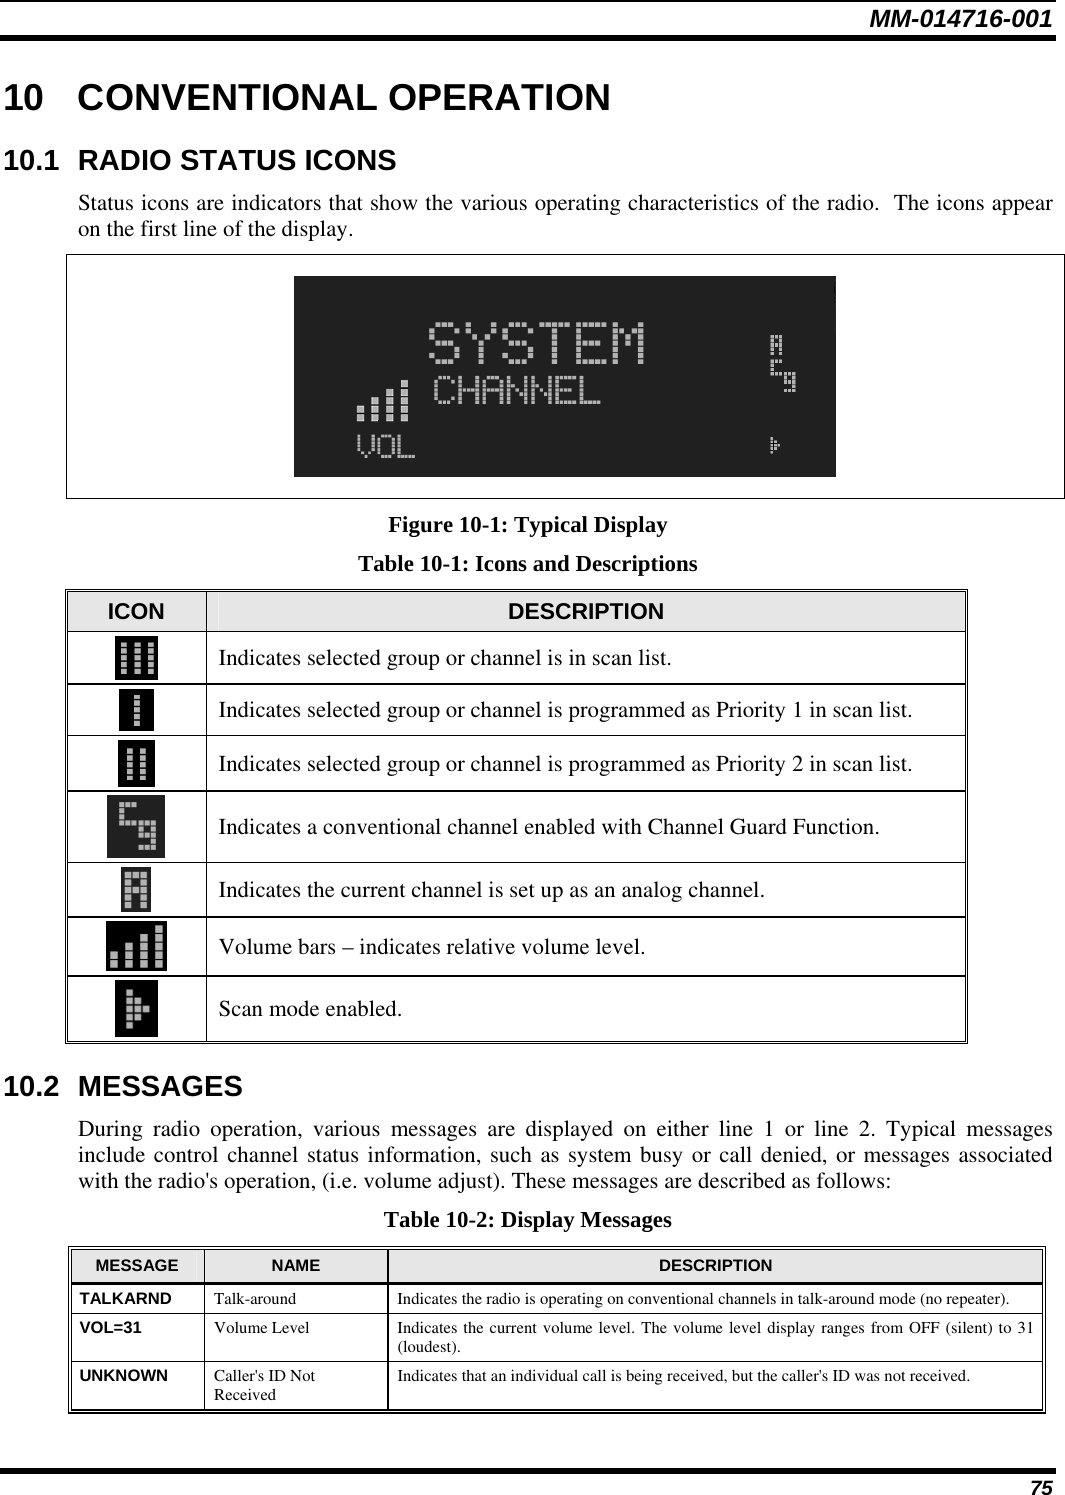 MM-014716-001 75 10 CONVENTIONAL OPERATION 10.1  RADIO STATUS ICONS Status icons are indicators that show the various operating characteristics of the radio.  The icons appear on the first line of the display.    Figure 10-1: Typical Display Table 10-1: Icons and Descriptions ICON  DESCRIPTION  Indicates selected group or channel is in scan list.  Indicates selected group or channel is programmed as Priority 1 in scan list.  Indicates selected group or channel is programmed as Priority 2 in scan list.  Indicates a conventional channel enabled with Channel Guard Function.  Indicates the current channel is set up as an analog channel.  Volume bars – indicates relative volume level.  Scan mode enabled. 10.2 MESSAGES During radio operation, various messages are displayed on either line 1 or line 2. Typical messages include control channel status information, such as system busy or call denied, or messages associated with the radio&apos;s operation, (i.e. volume adjust). These messages are described as follows: Table 10-2: Display Messages MESSAGE  NAME  DESCRIPTION TALKARND  Talk-around  Indicates the radio is operating on conventional channels in talk-around mode (no repeater). VOL=31  Volume Level  Indicates the current volume level. The volume level display ranges from OFF (silent) to 31 (loudest). UNKNOWN  Caller&apos;s ID Not Received  Indicates that an individual call is being received, but the caller&apos;s ID was not received. 